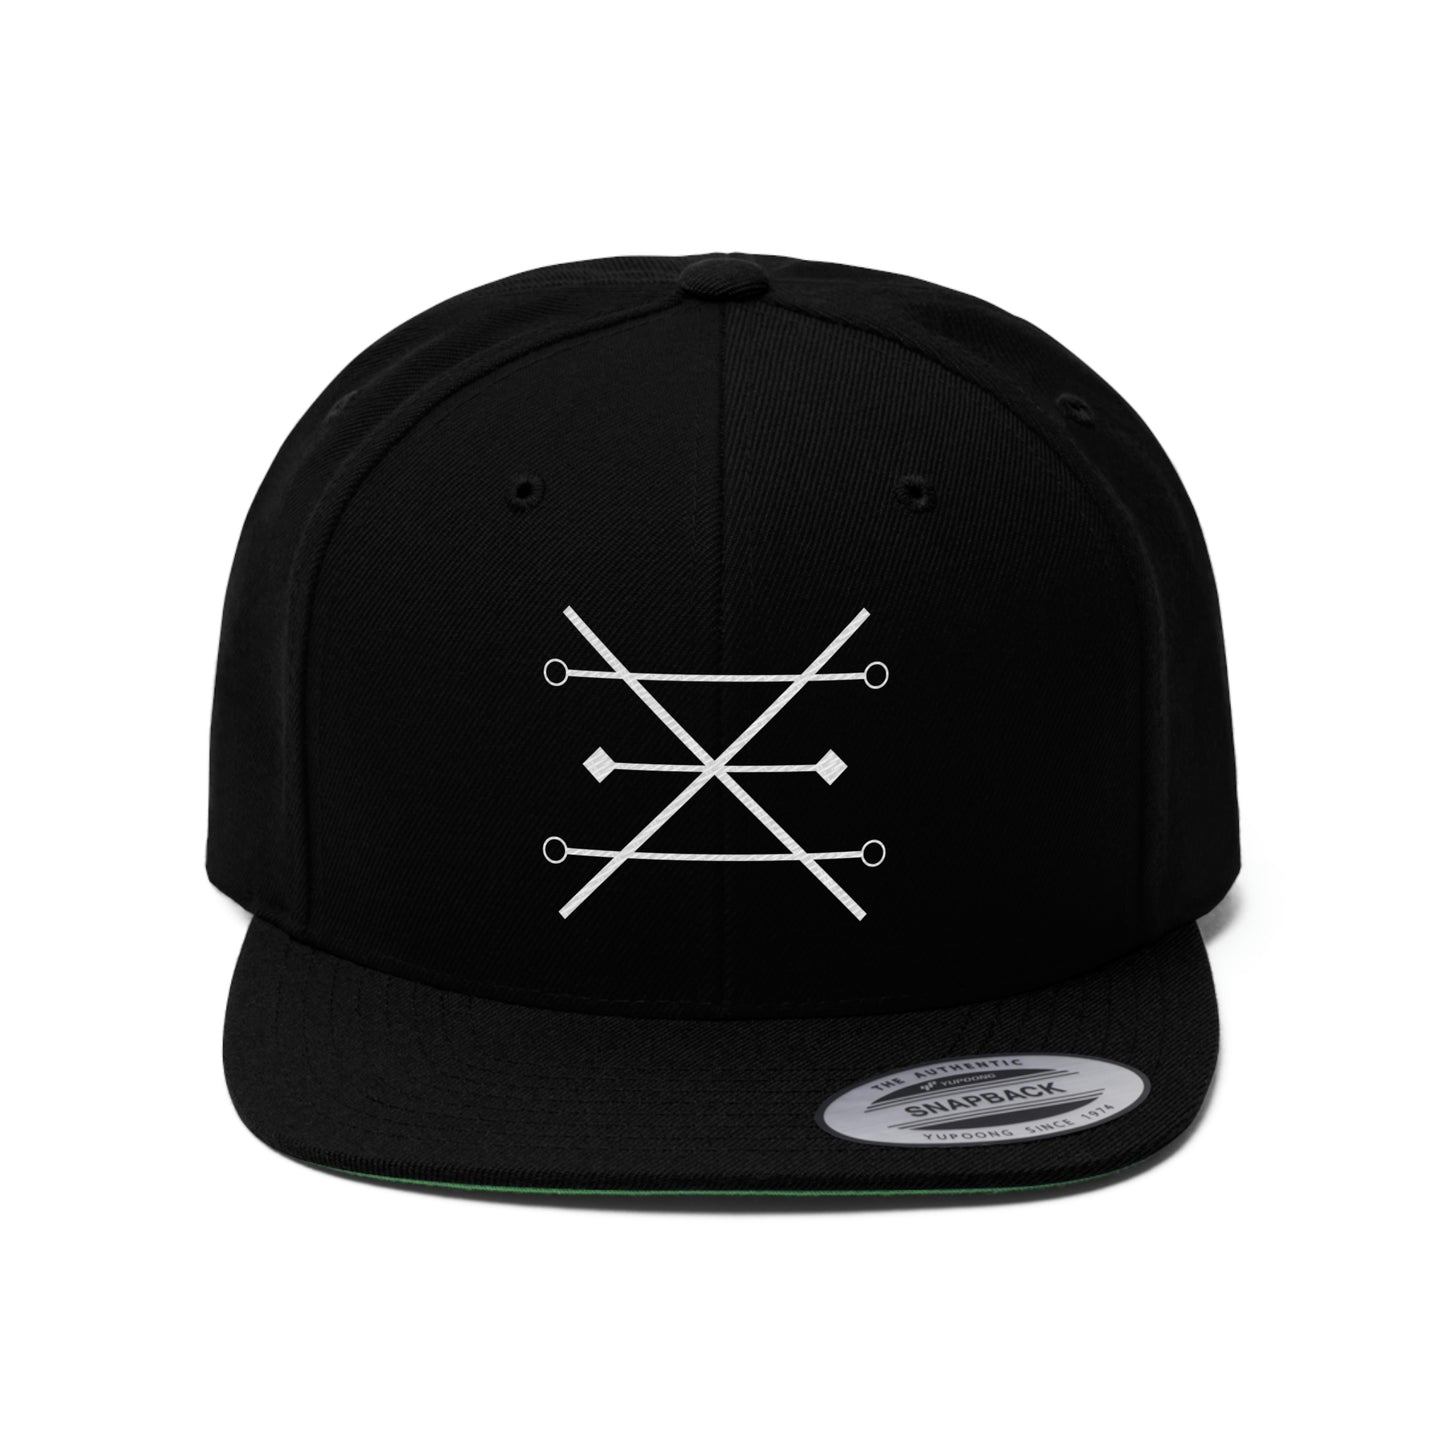 Younger Bodies Flat Bill Hat